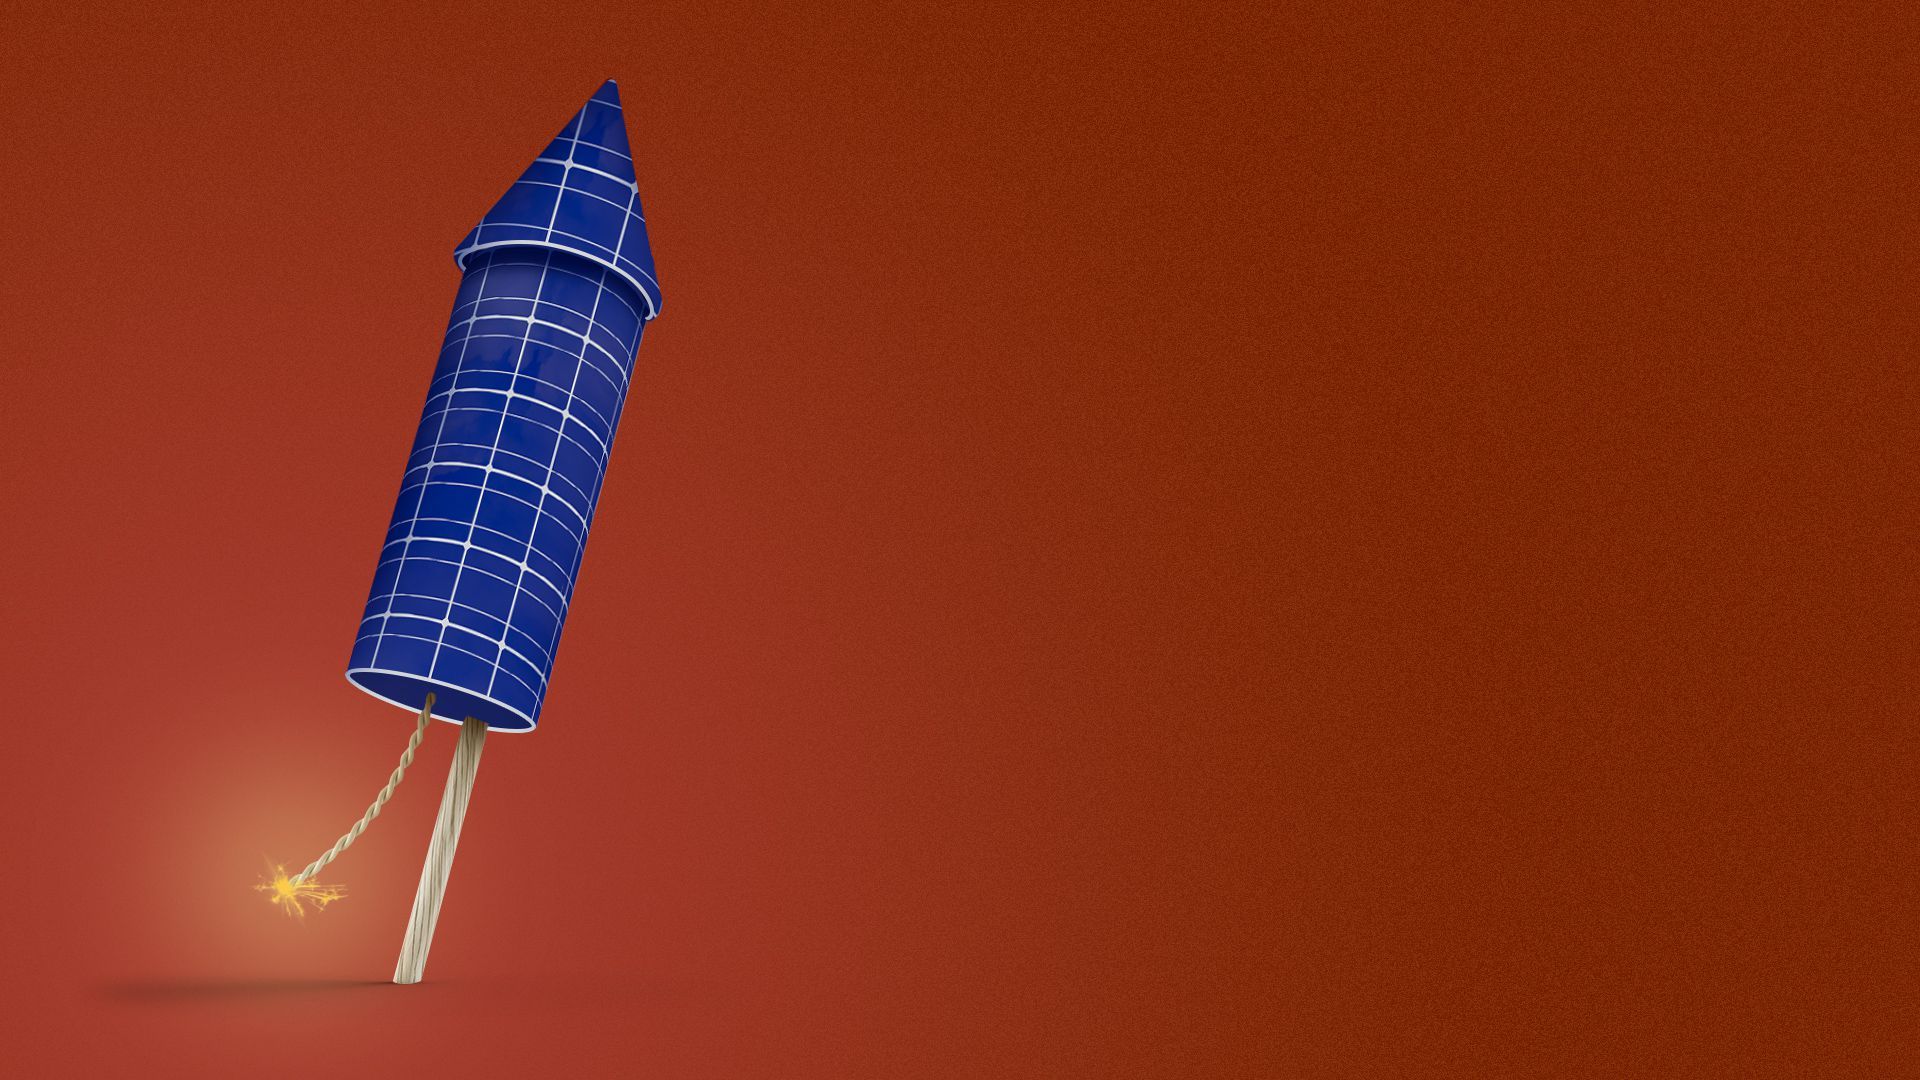 Illustration of a firecracker rocket made from solar panels with a lit fuse. 